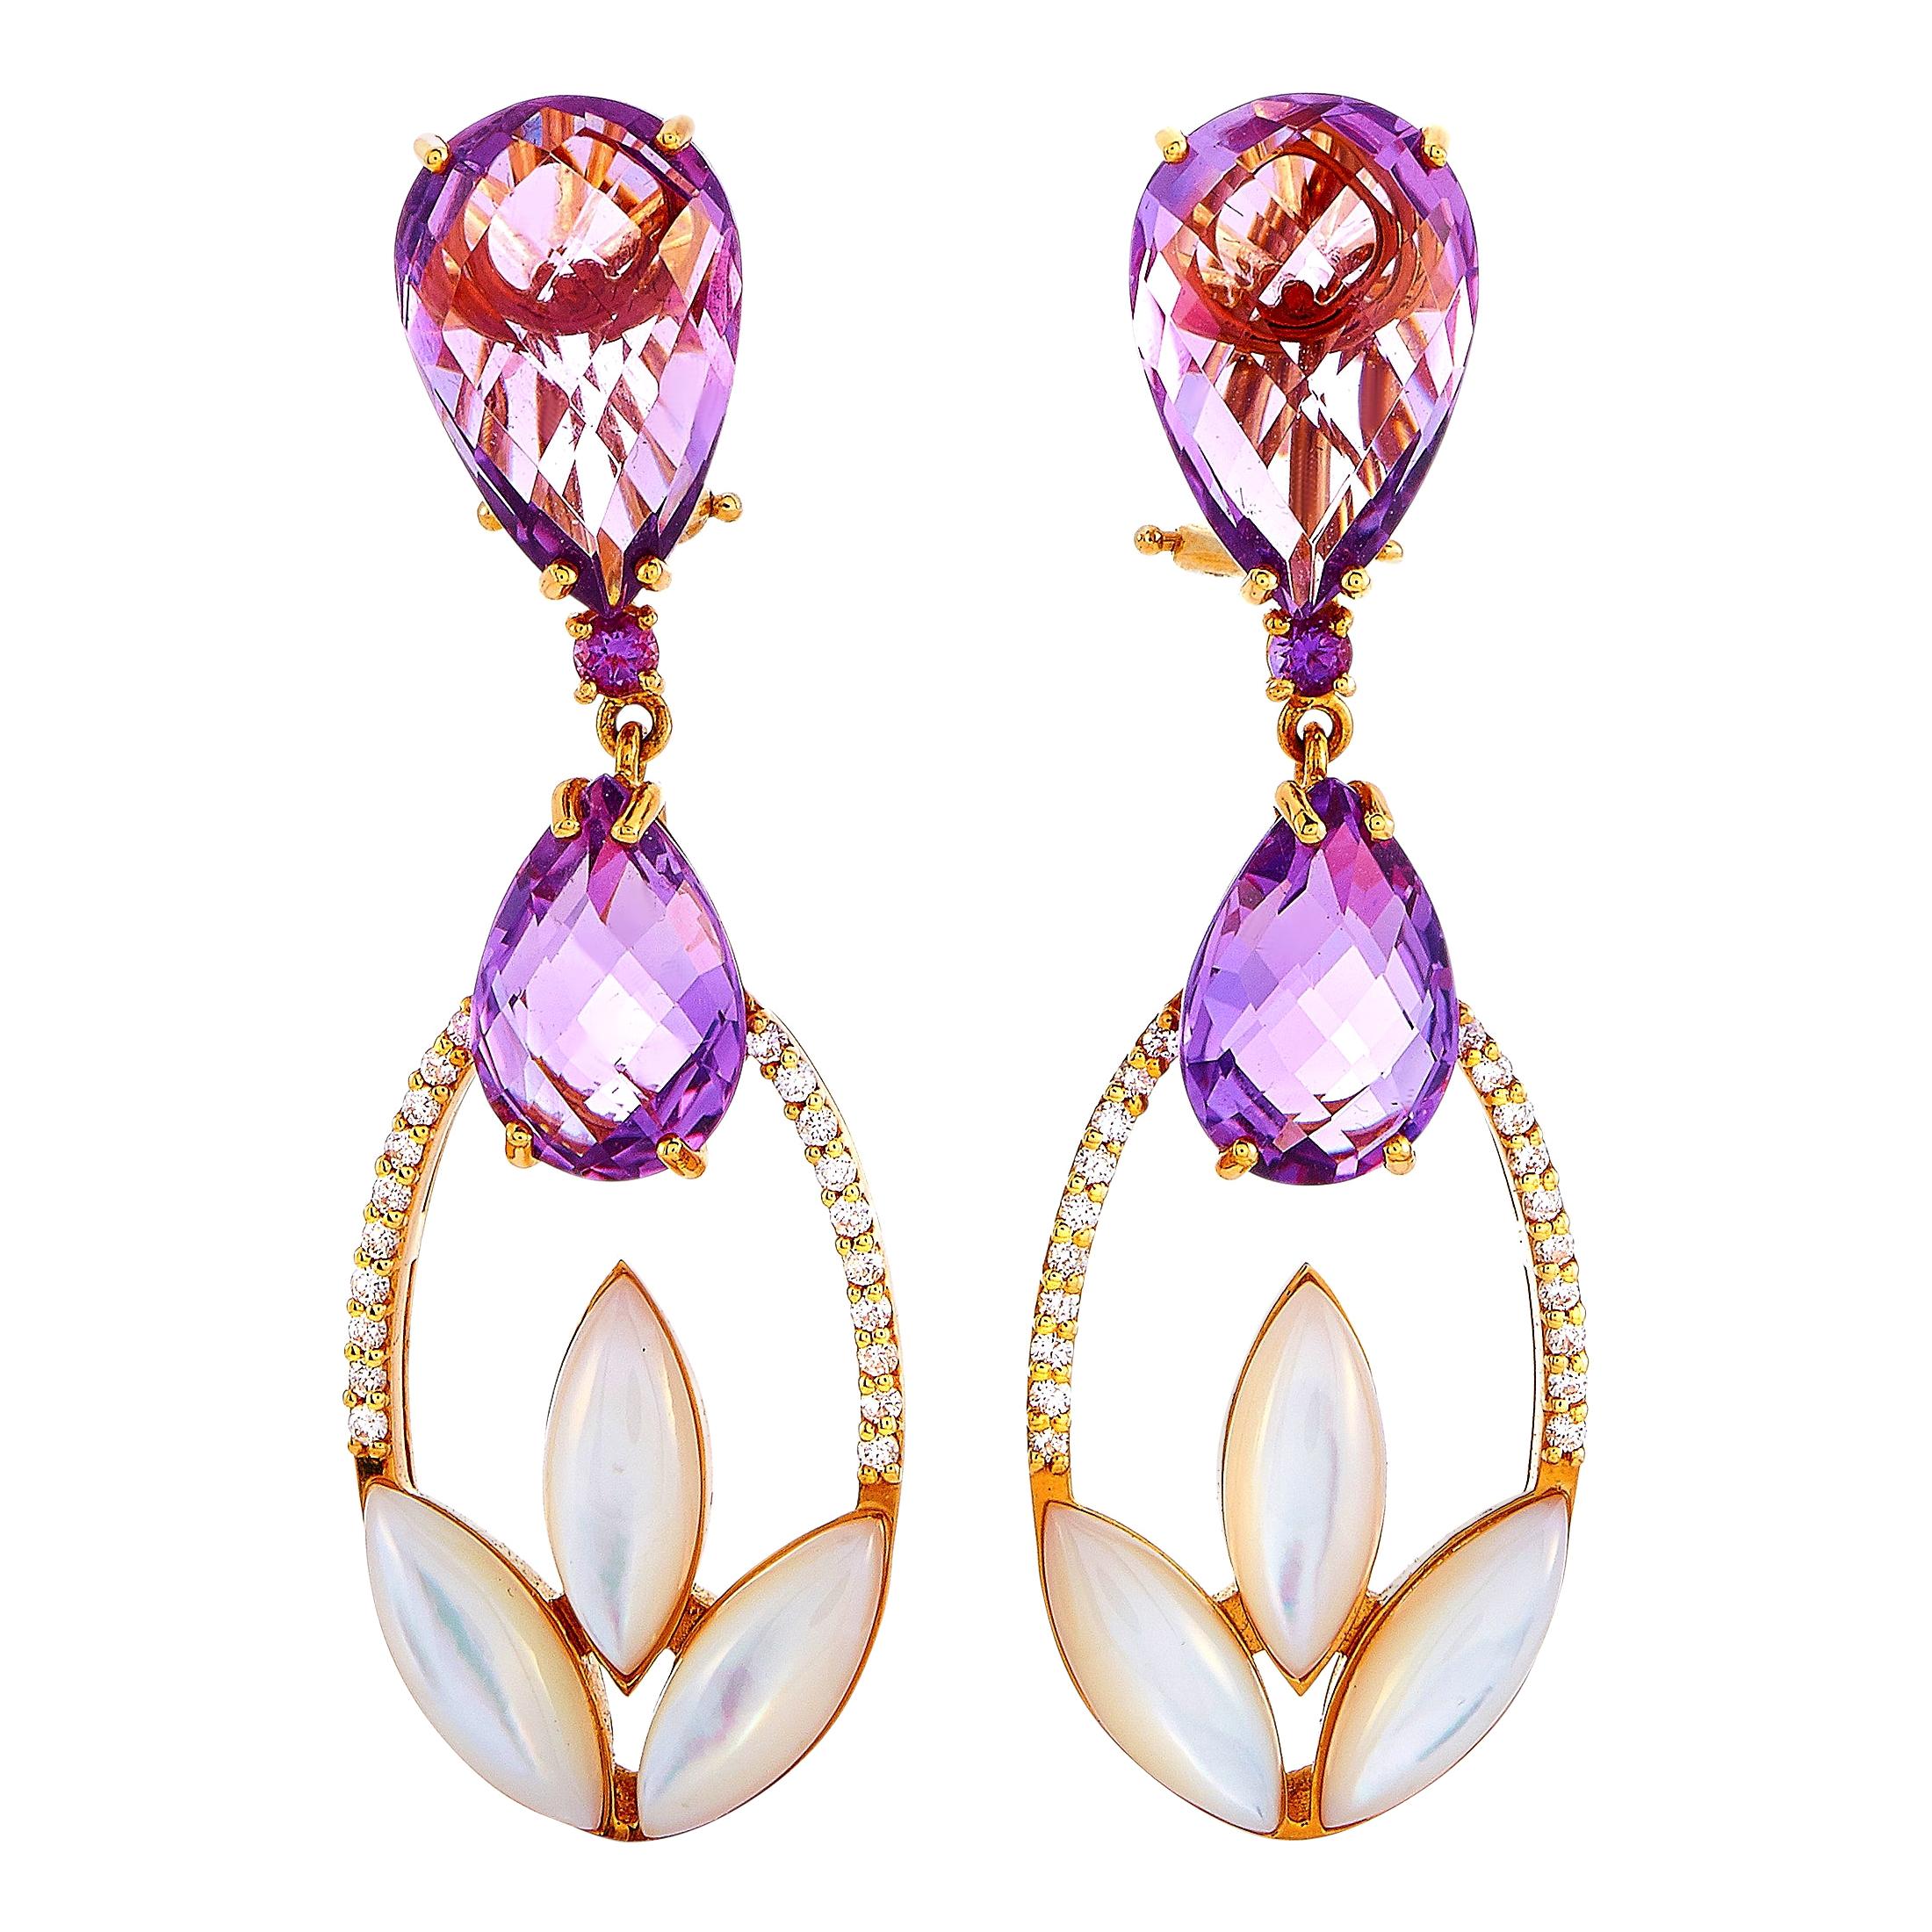 Oro Trend 18K Rose Gold 0.35 ct Diamond, Amethyst and Mother of Pearl Earrings